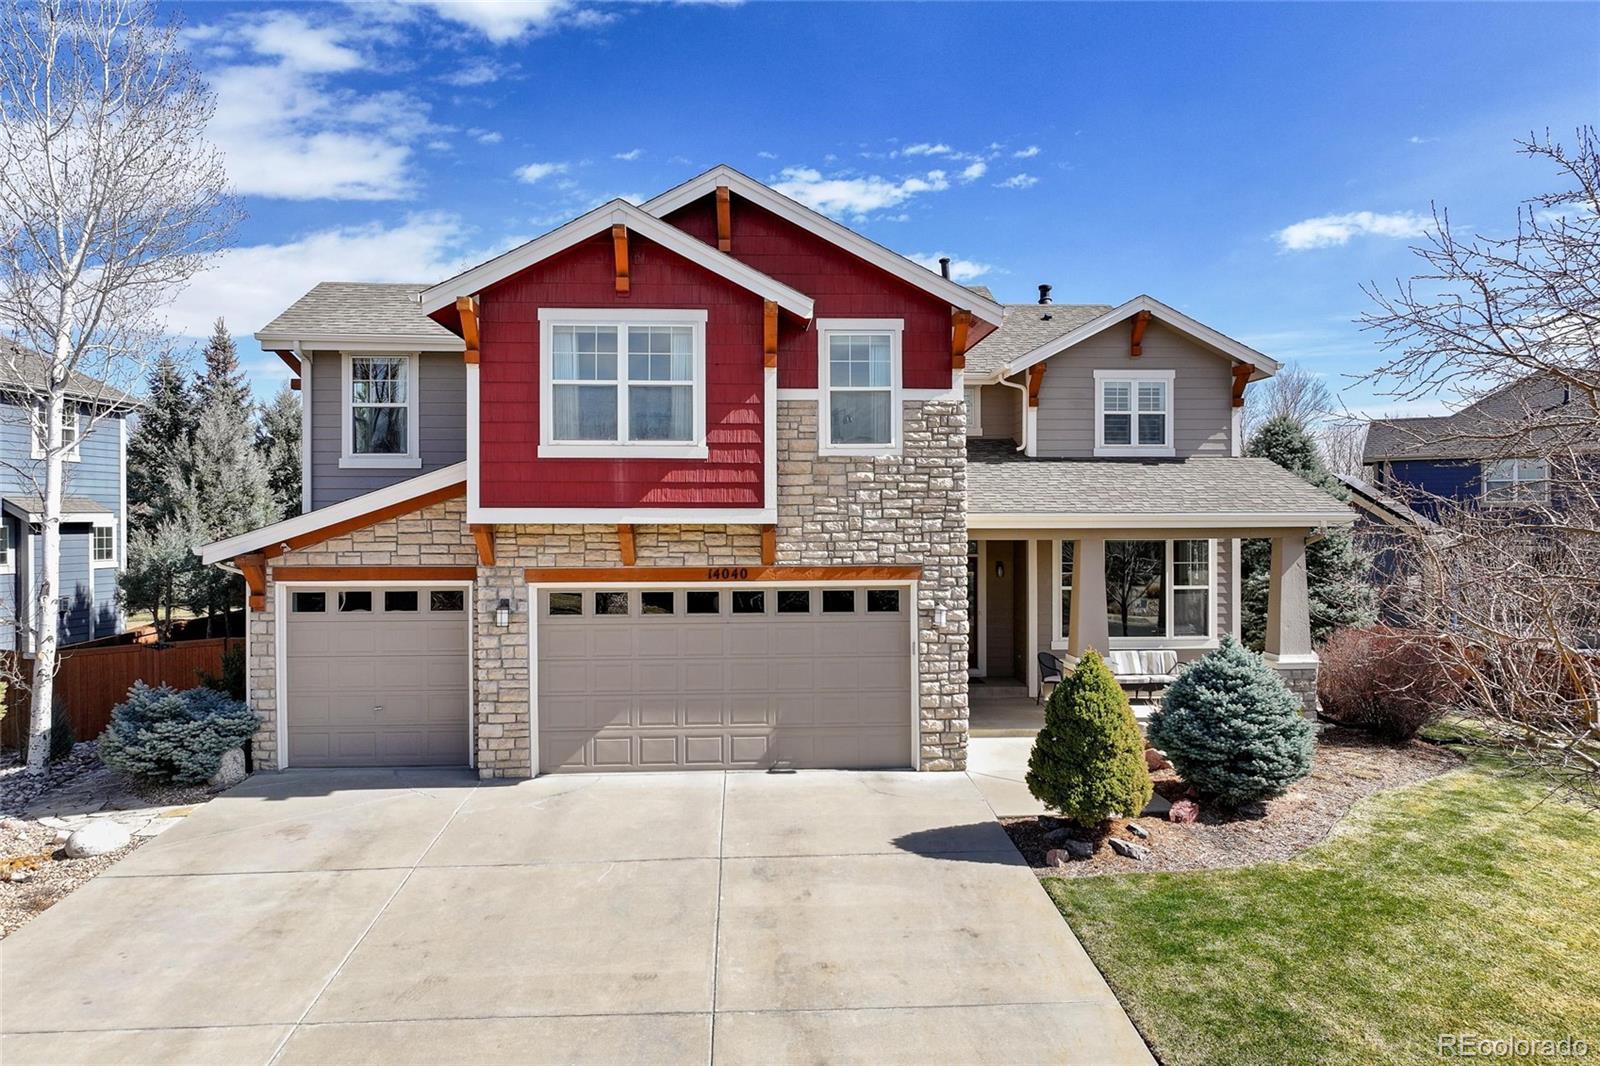 14040  park cove drive, Broomfield sold home. Closed on 2024-03-29 for $1,150,000.